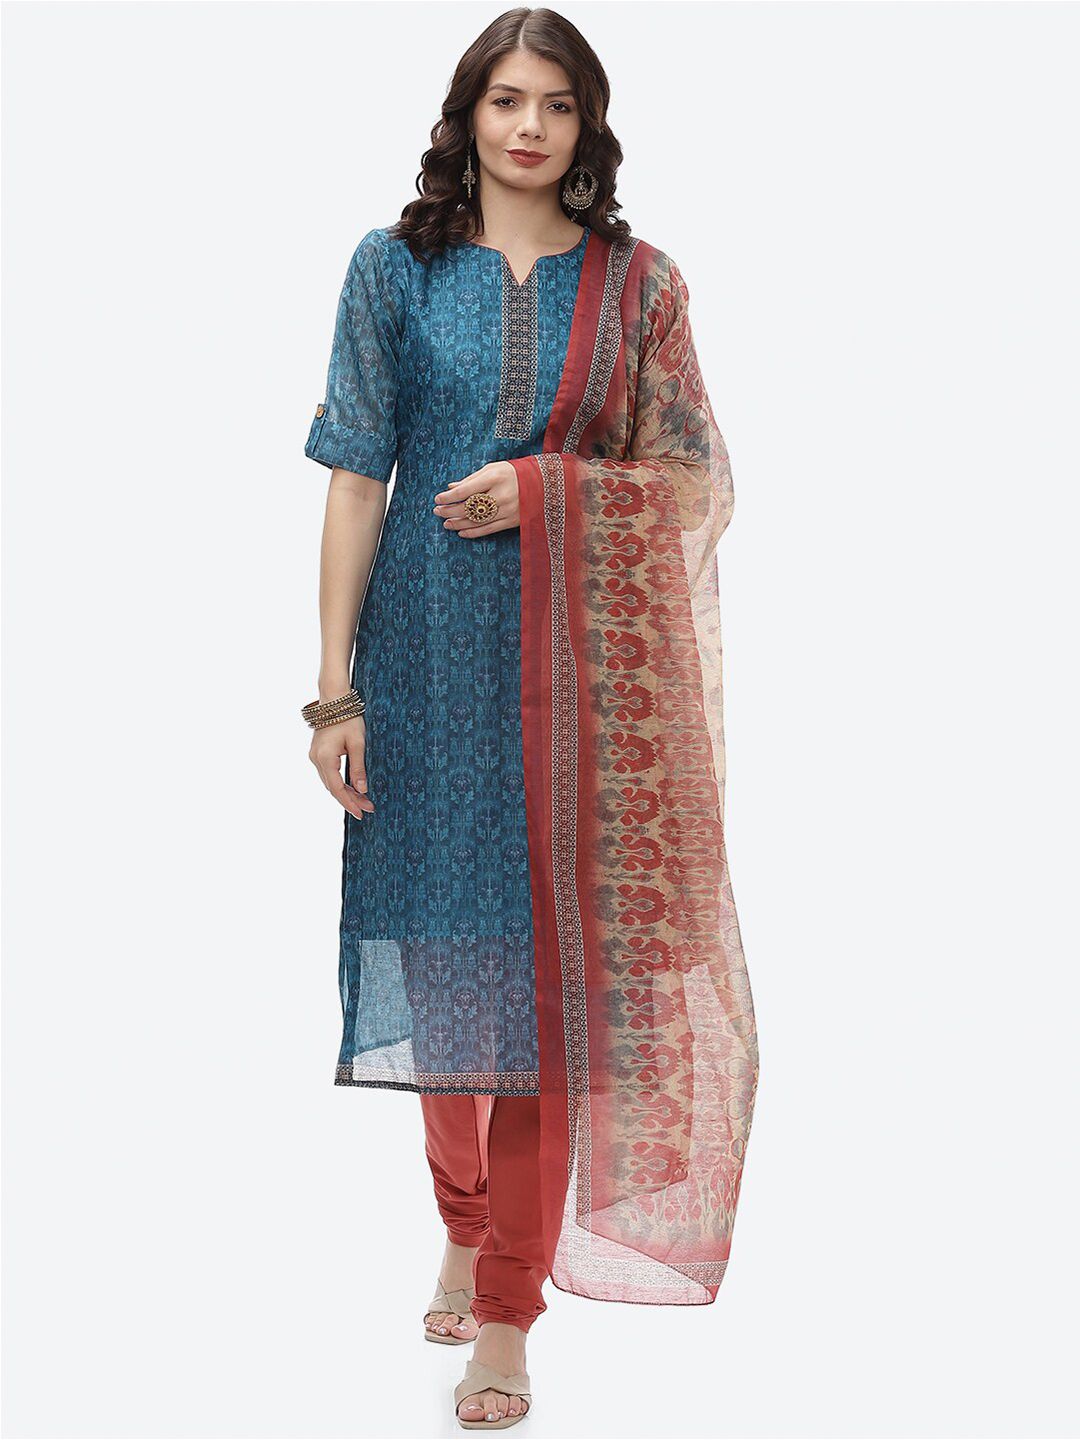 Biba Blue & Brown Printed Unstitched Dress Material Price in India